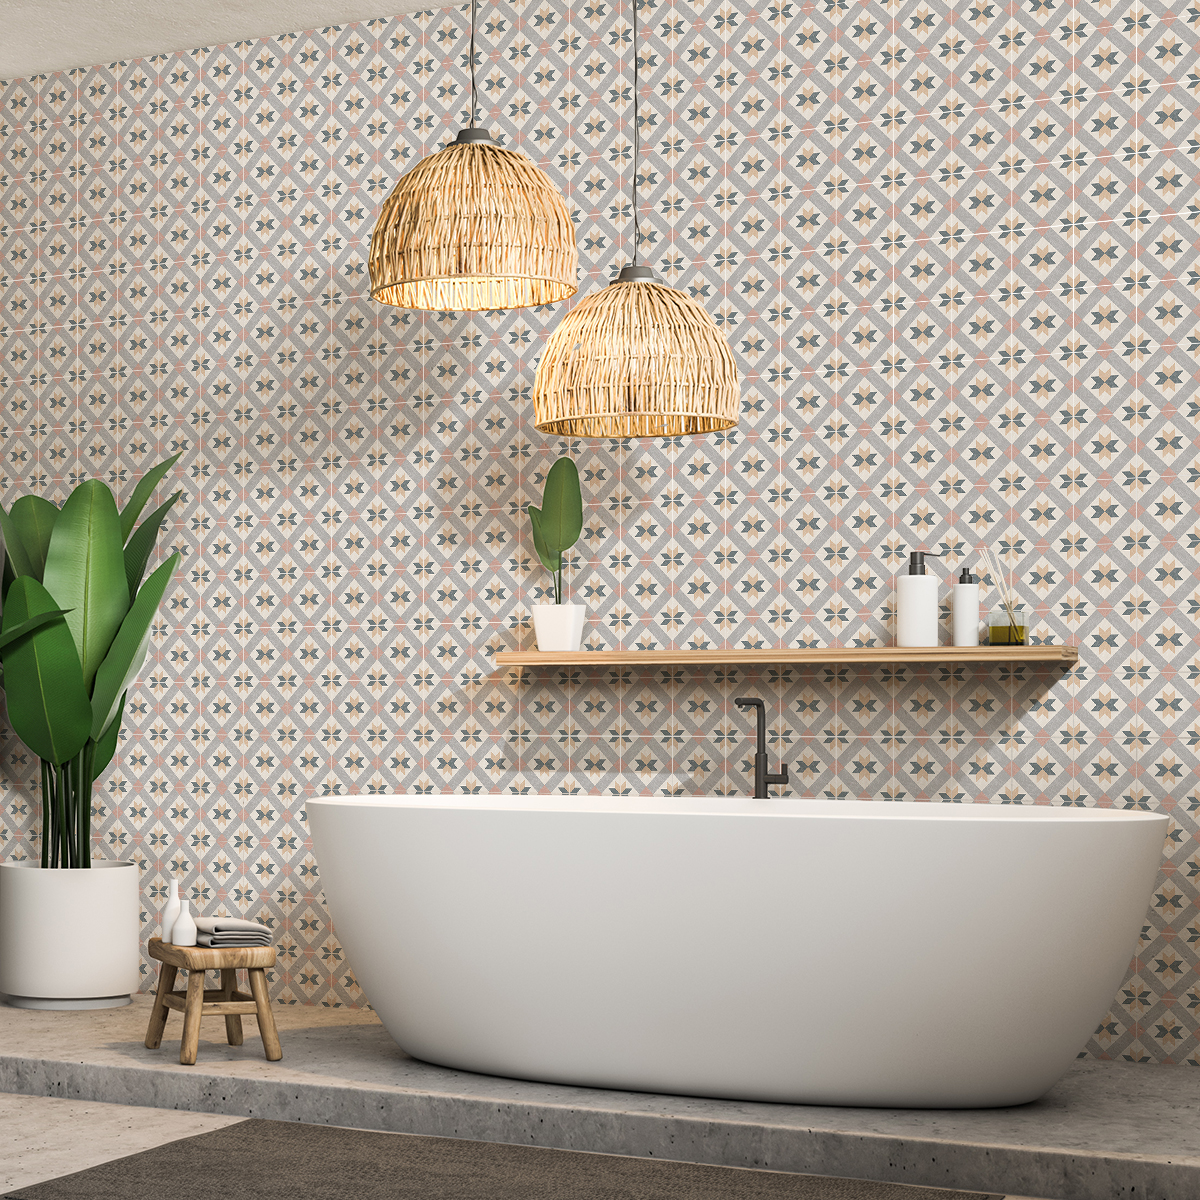 60 wall stickers cement tiles genio